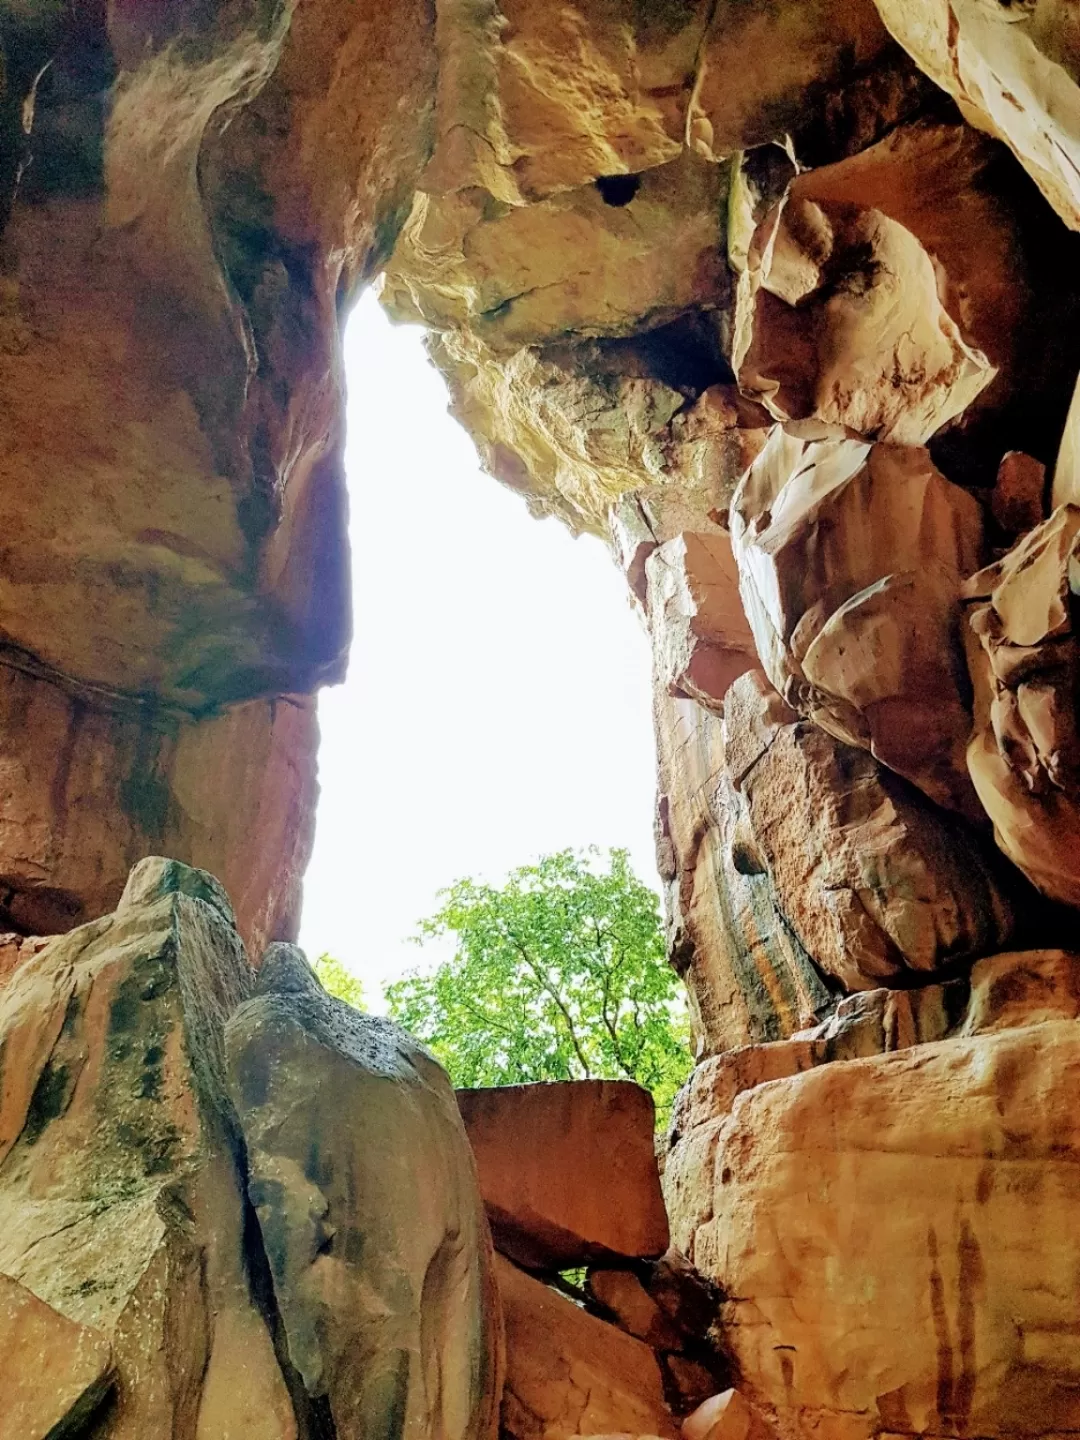 Photo of Bhimbetka rock shelters By Tripti Dubey